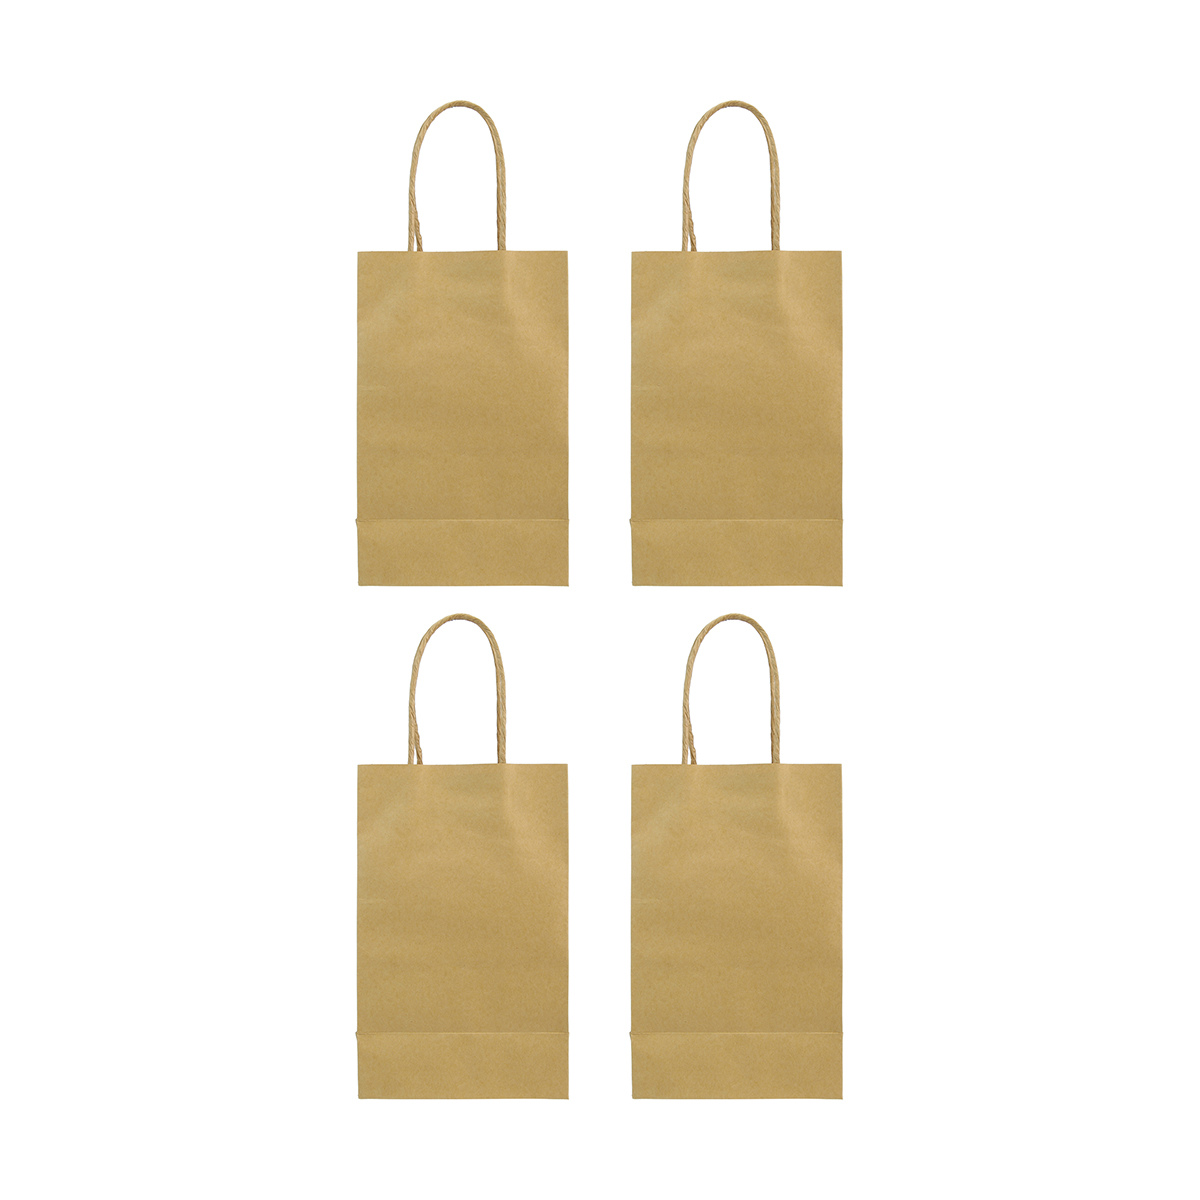 Craft Bags 4 Pack Kmart